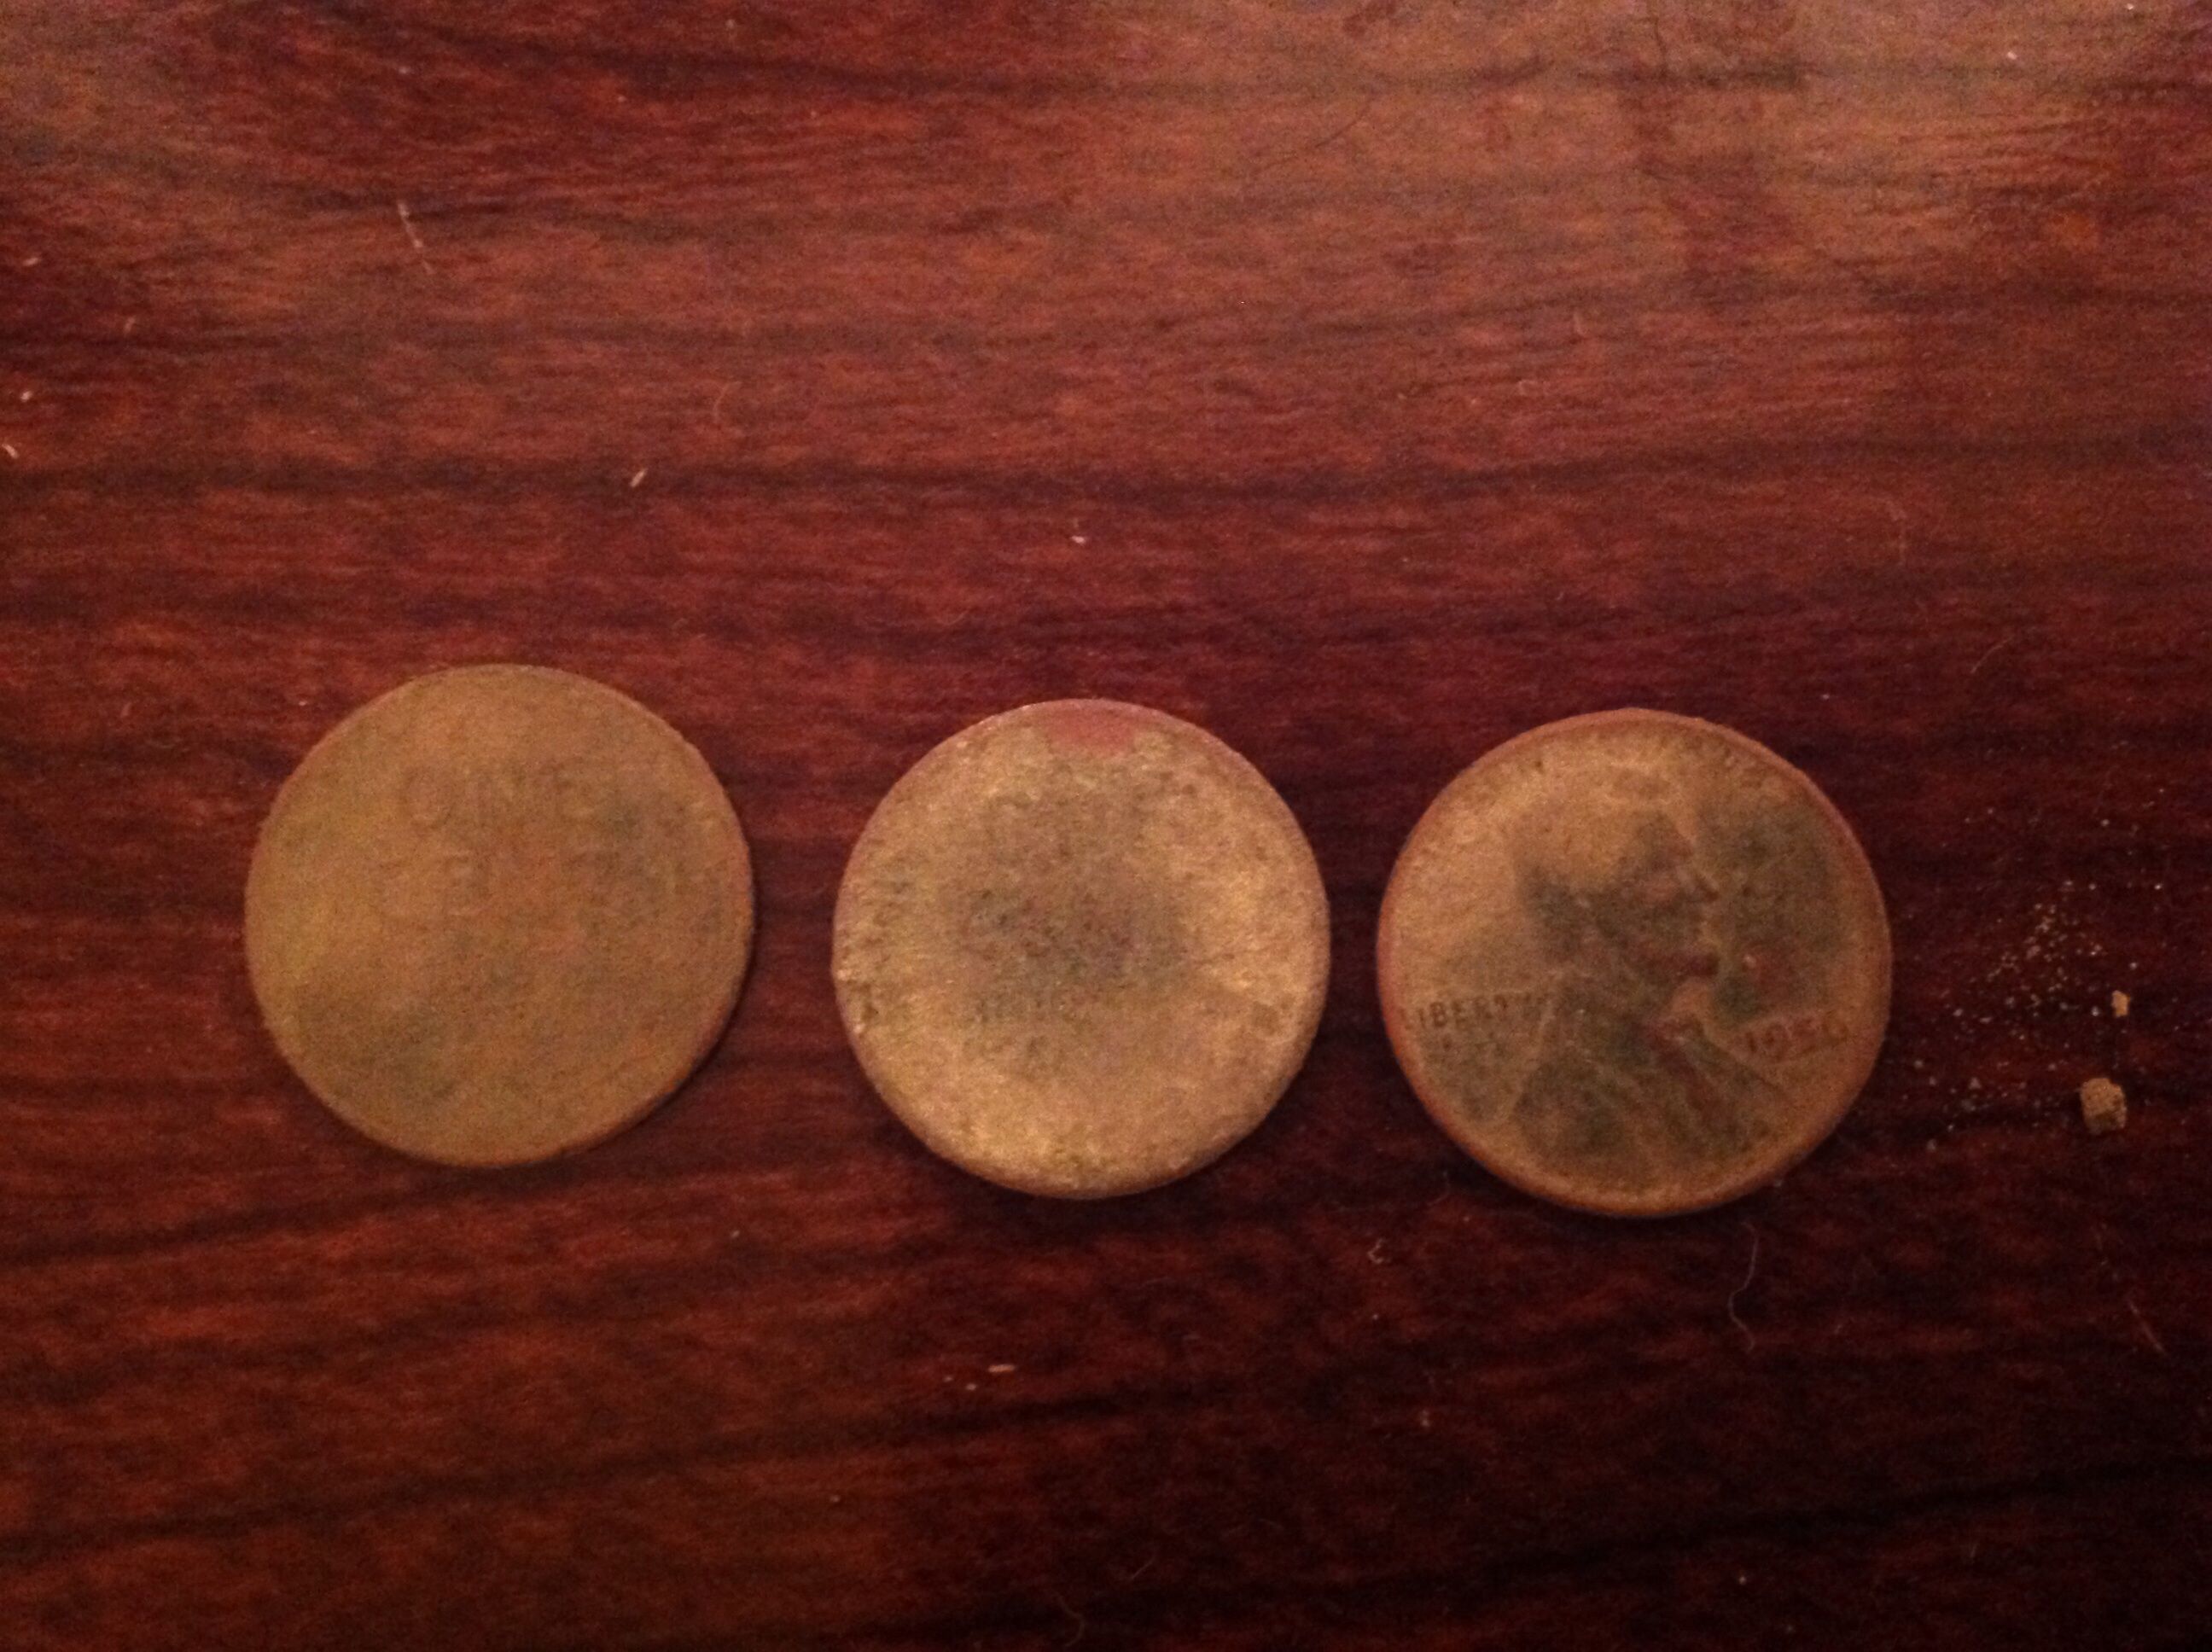 3 wheat cents